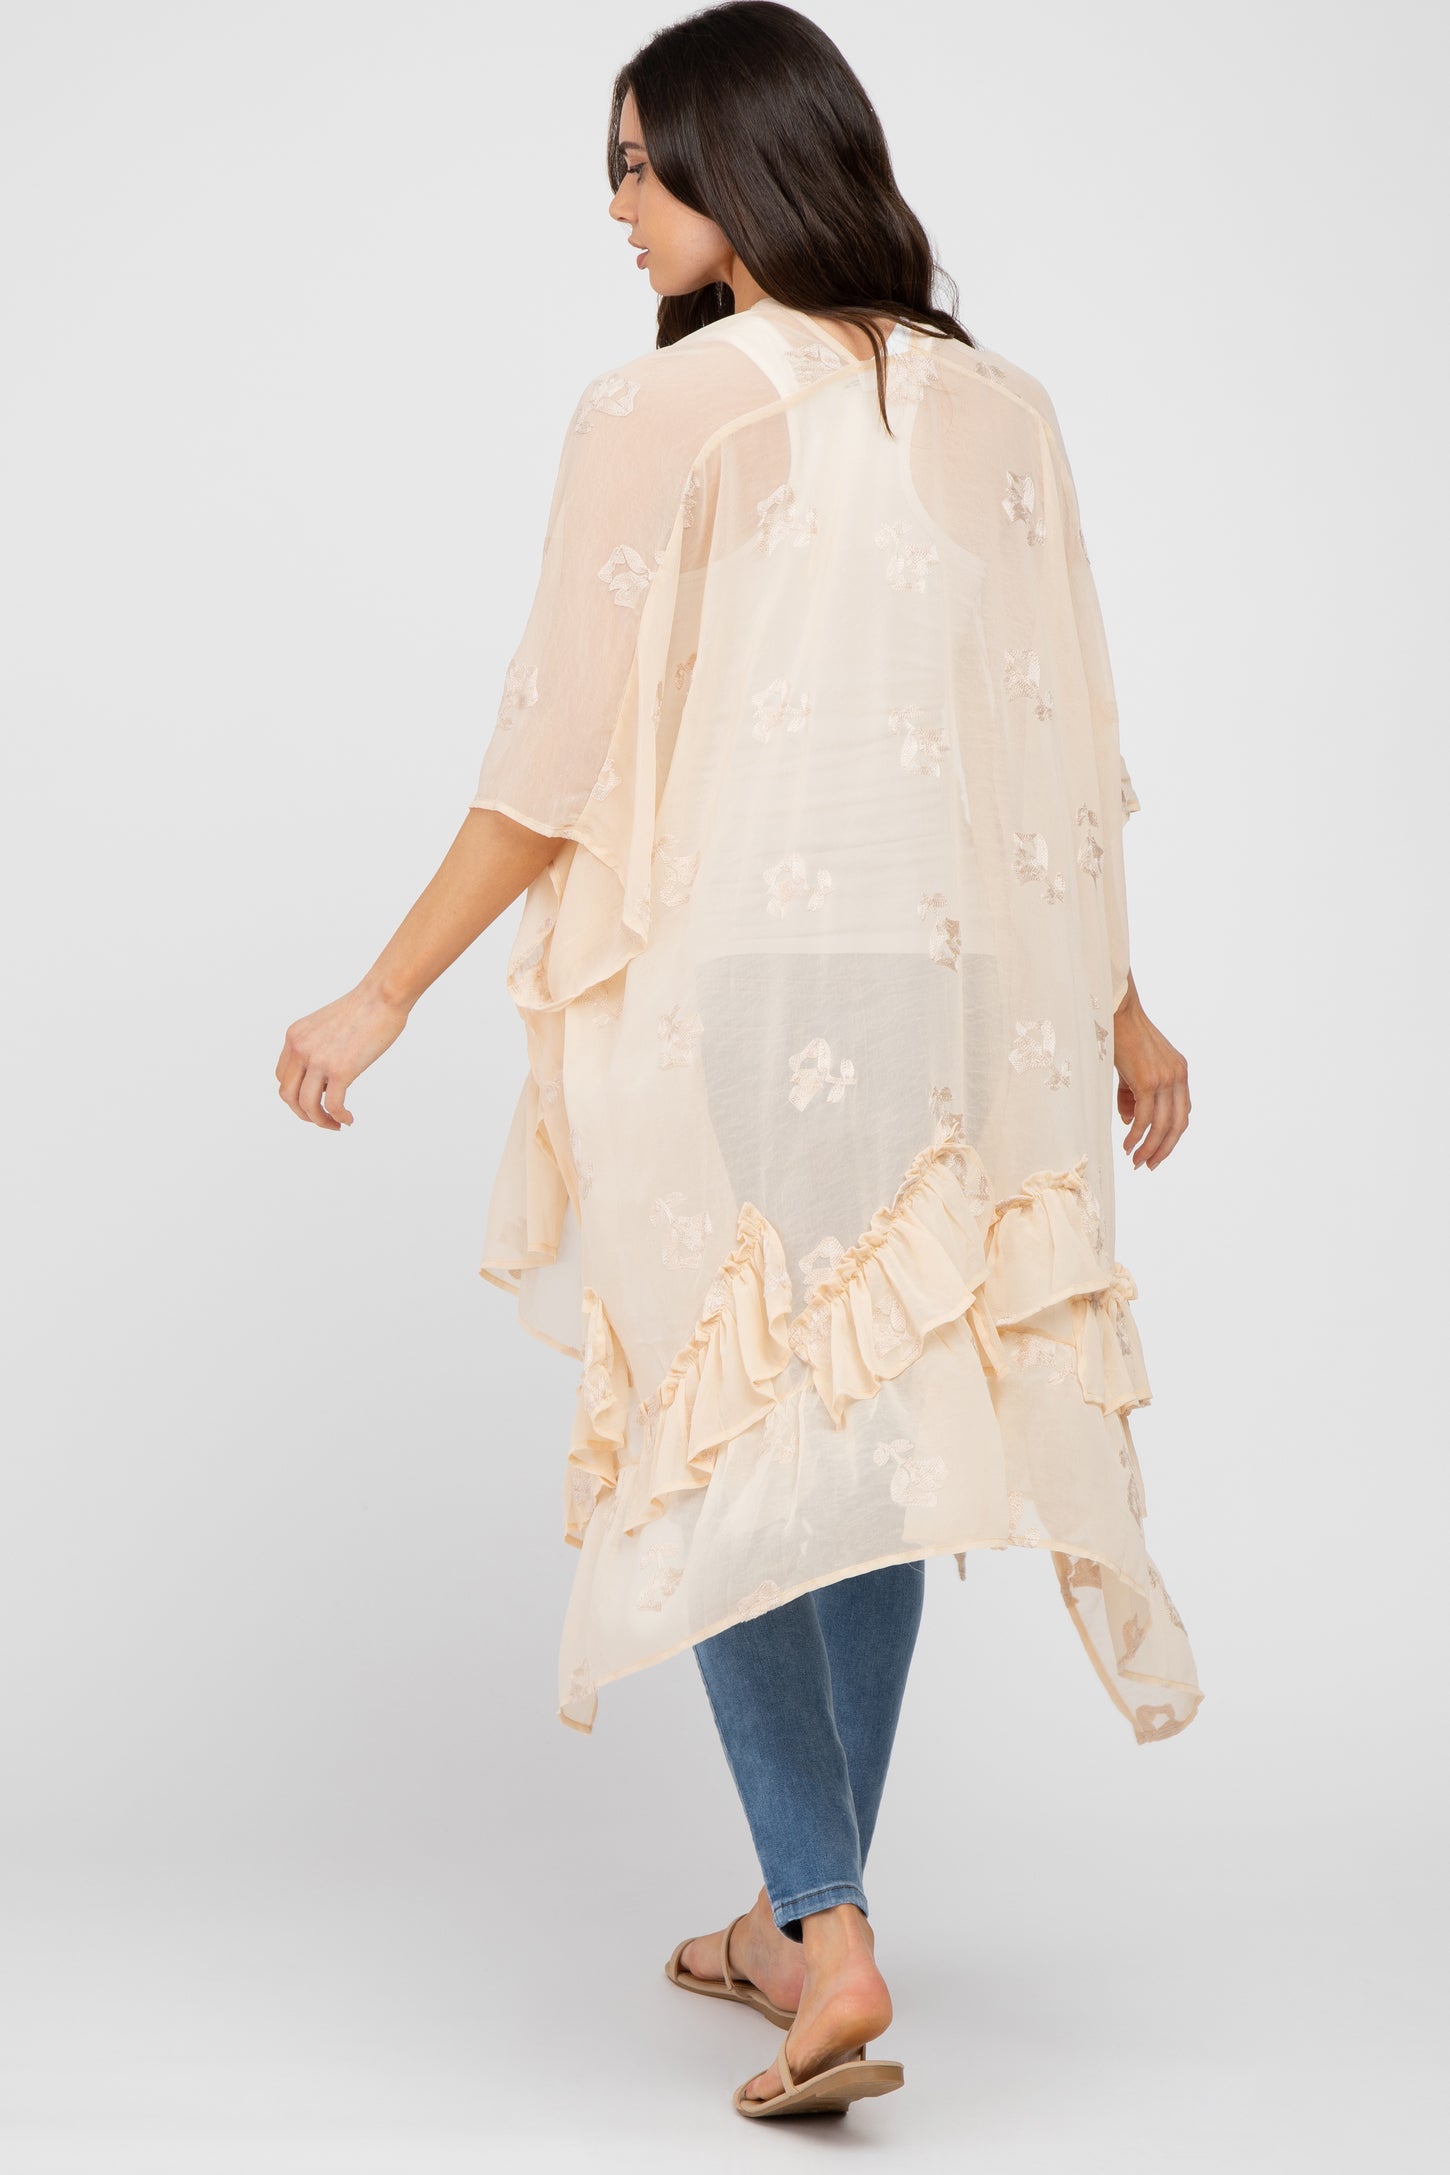 Beige Chiffon Floral Embroidered Ruffle Maternity Cover-Up– PinkBlush